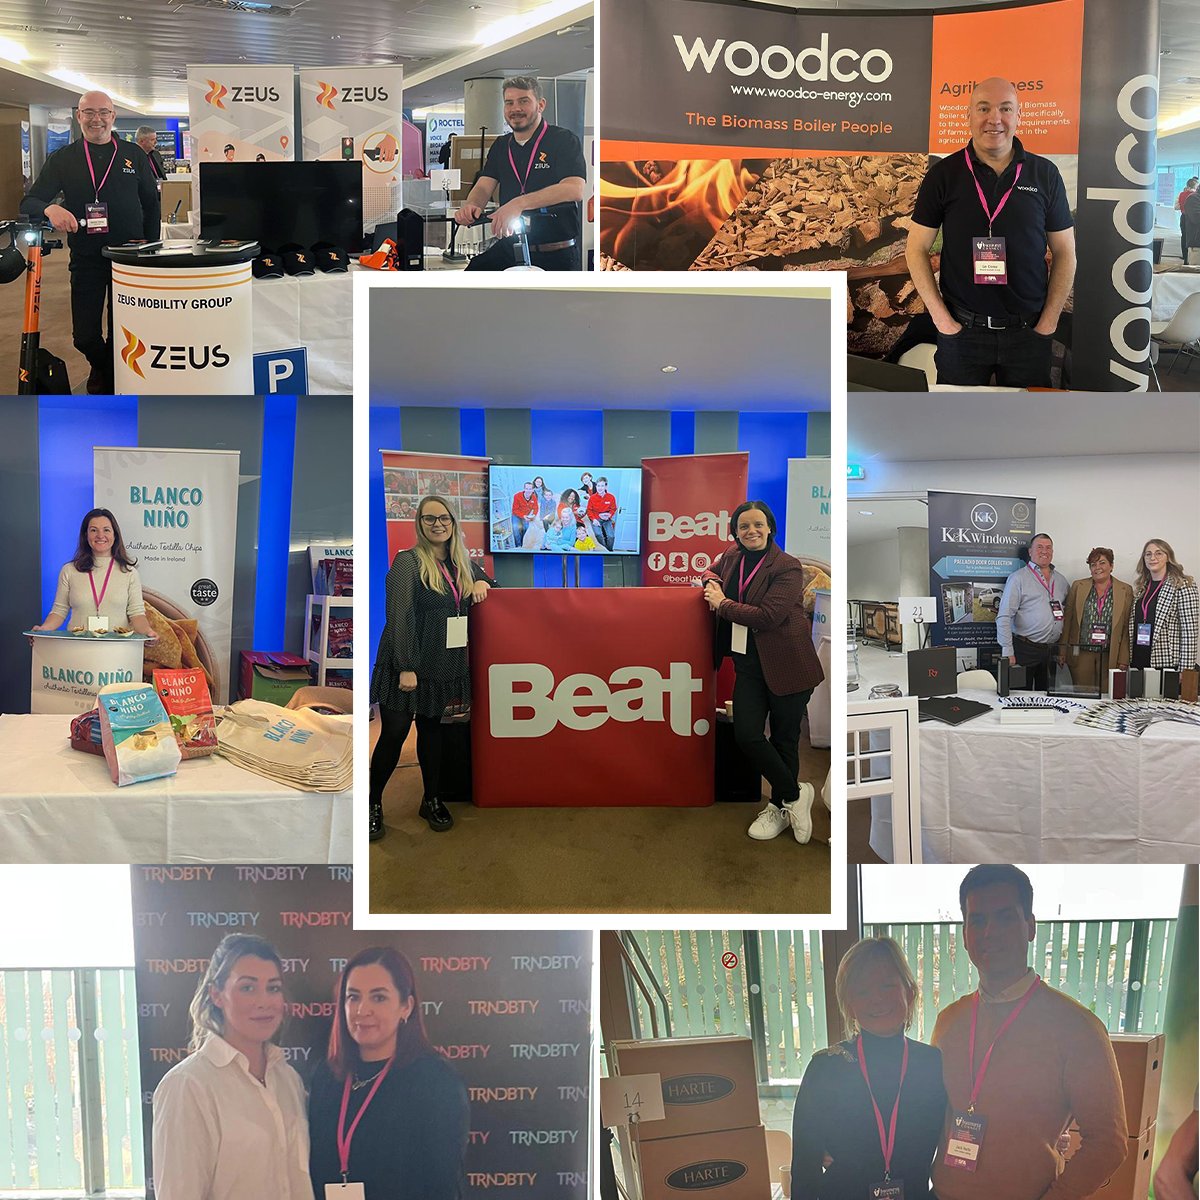 Beat is a finalist in the Small Firms Association Awards 'Workplace Wellbeing' category! 🏆

As part of the awards, we're proud to be one of several businesses from the South East showcasing at #BizConnect 2023 in the Aviva Stadium.